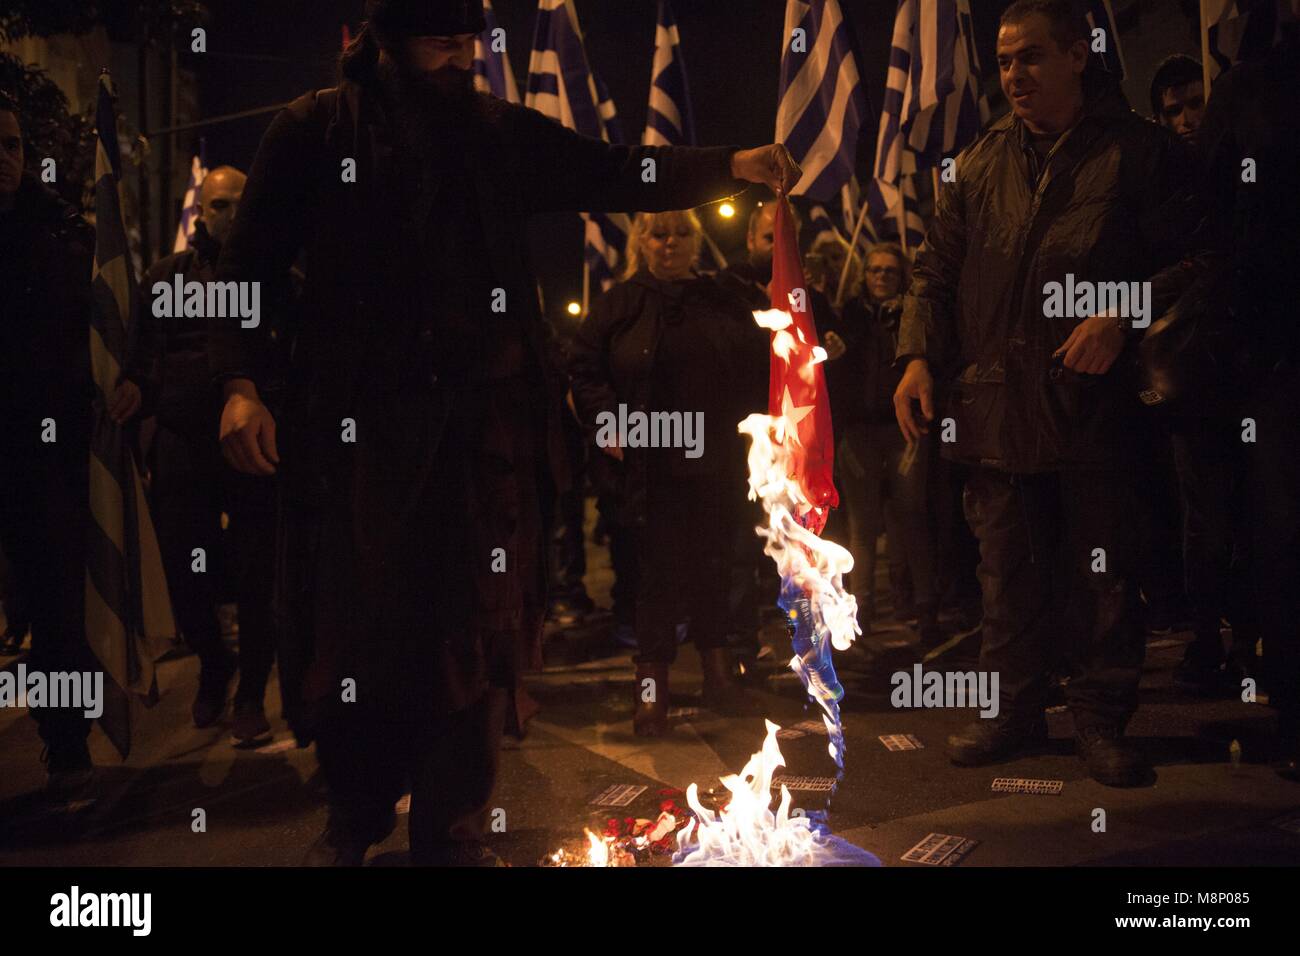 Members of Greek ultranationalist, far-right political party Chrysi Avgi (Golden Dawn) burn Turkish flag, during rally in Athens. 05.03.2018 | usage worldwide Stock Photo